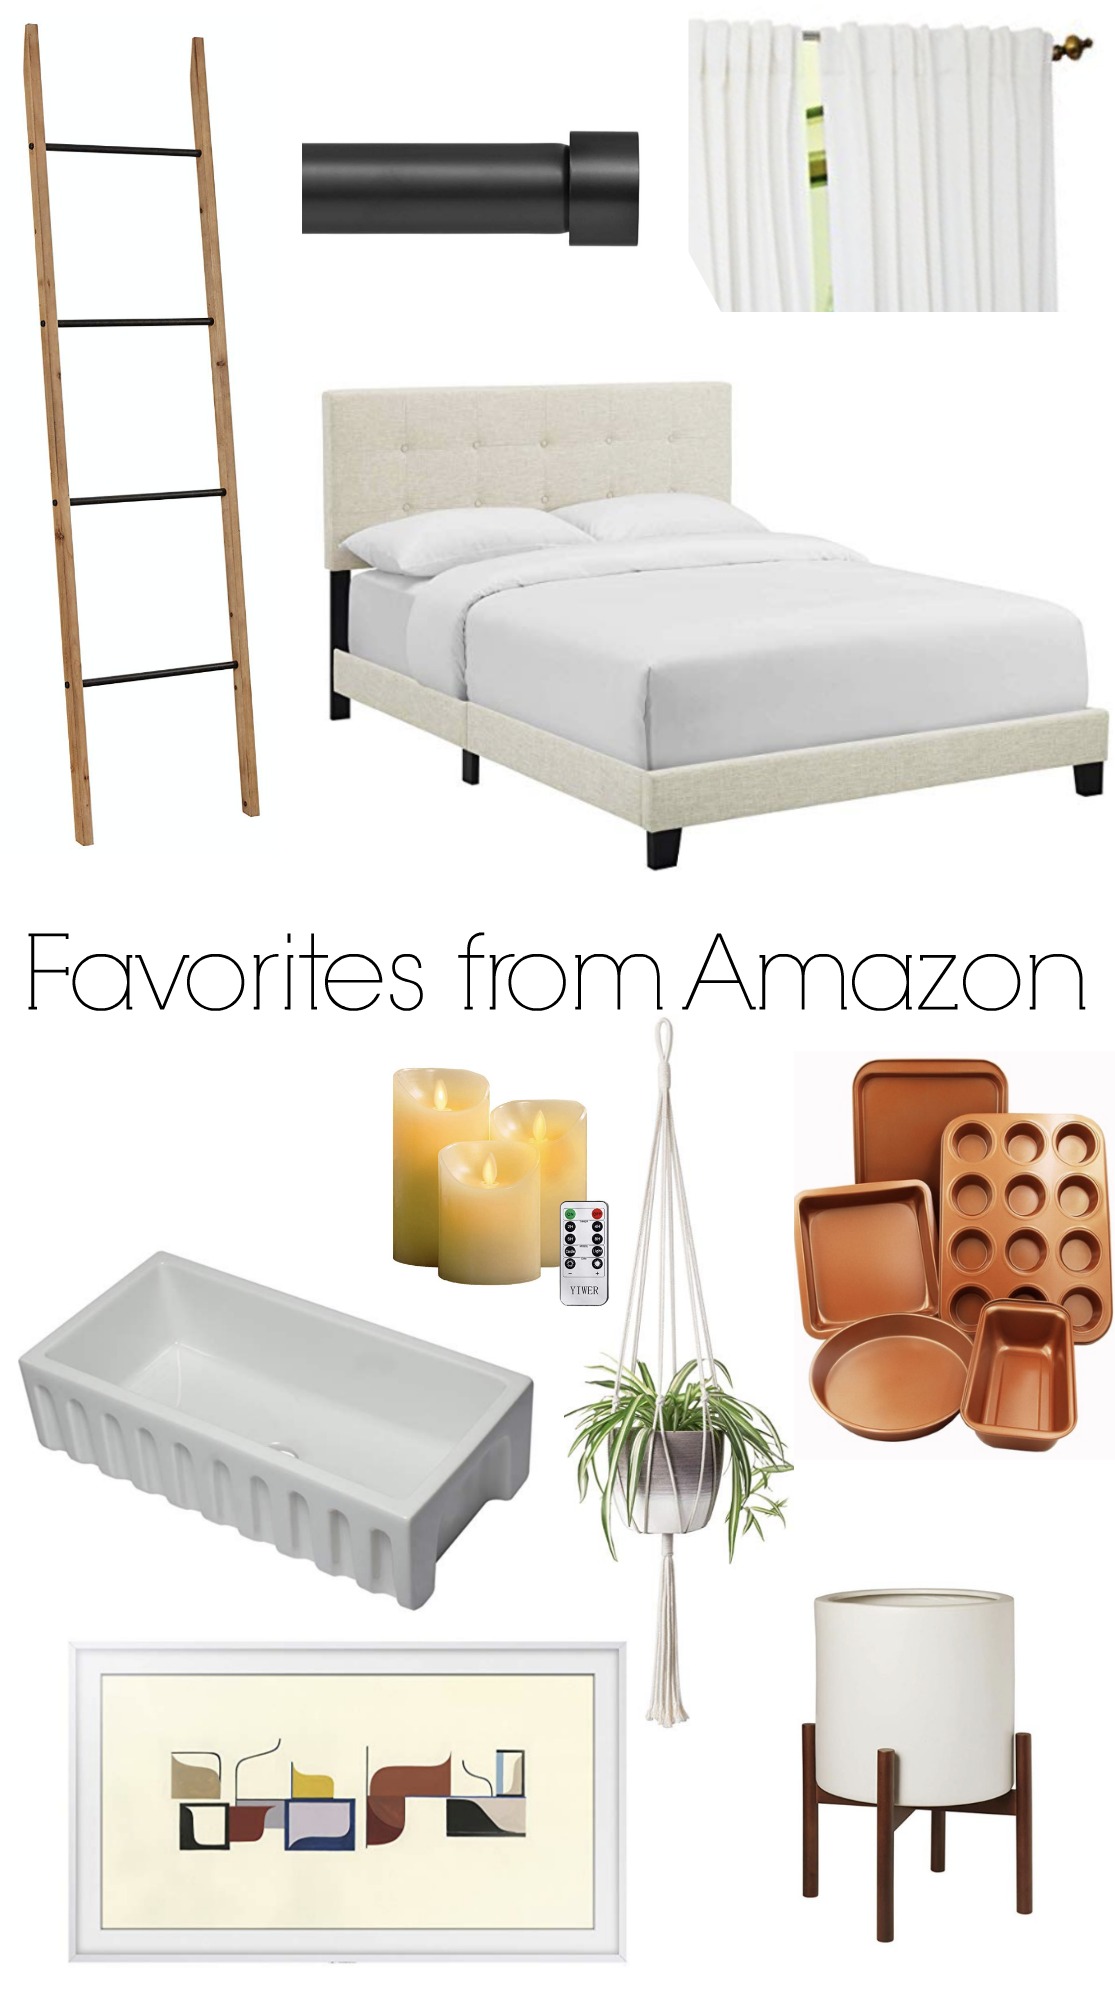 Amazon Favorites- Curtain Rod, Curtain Panels, Bed and more!